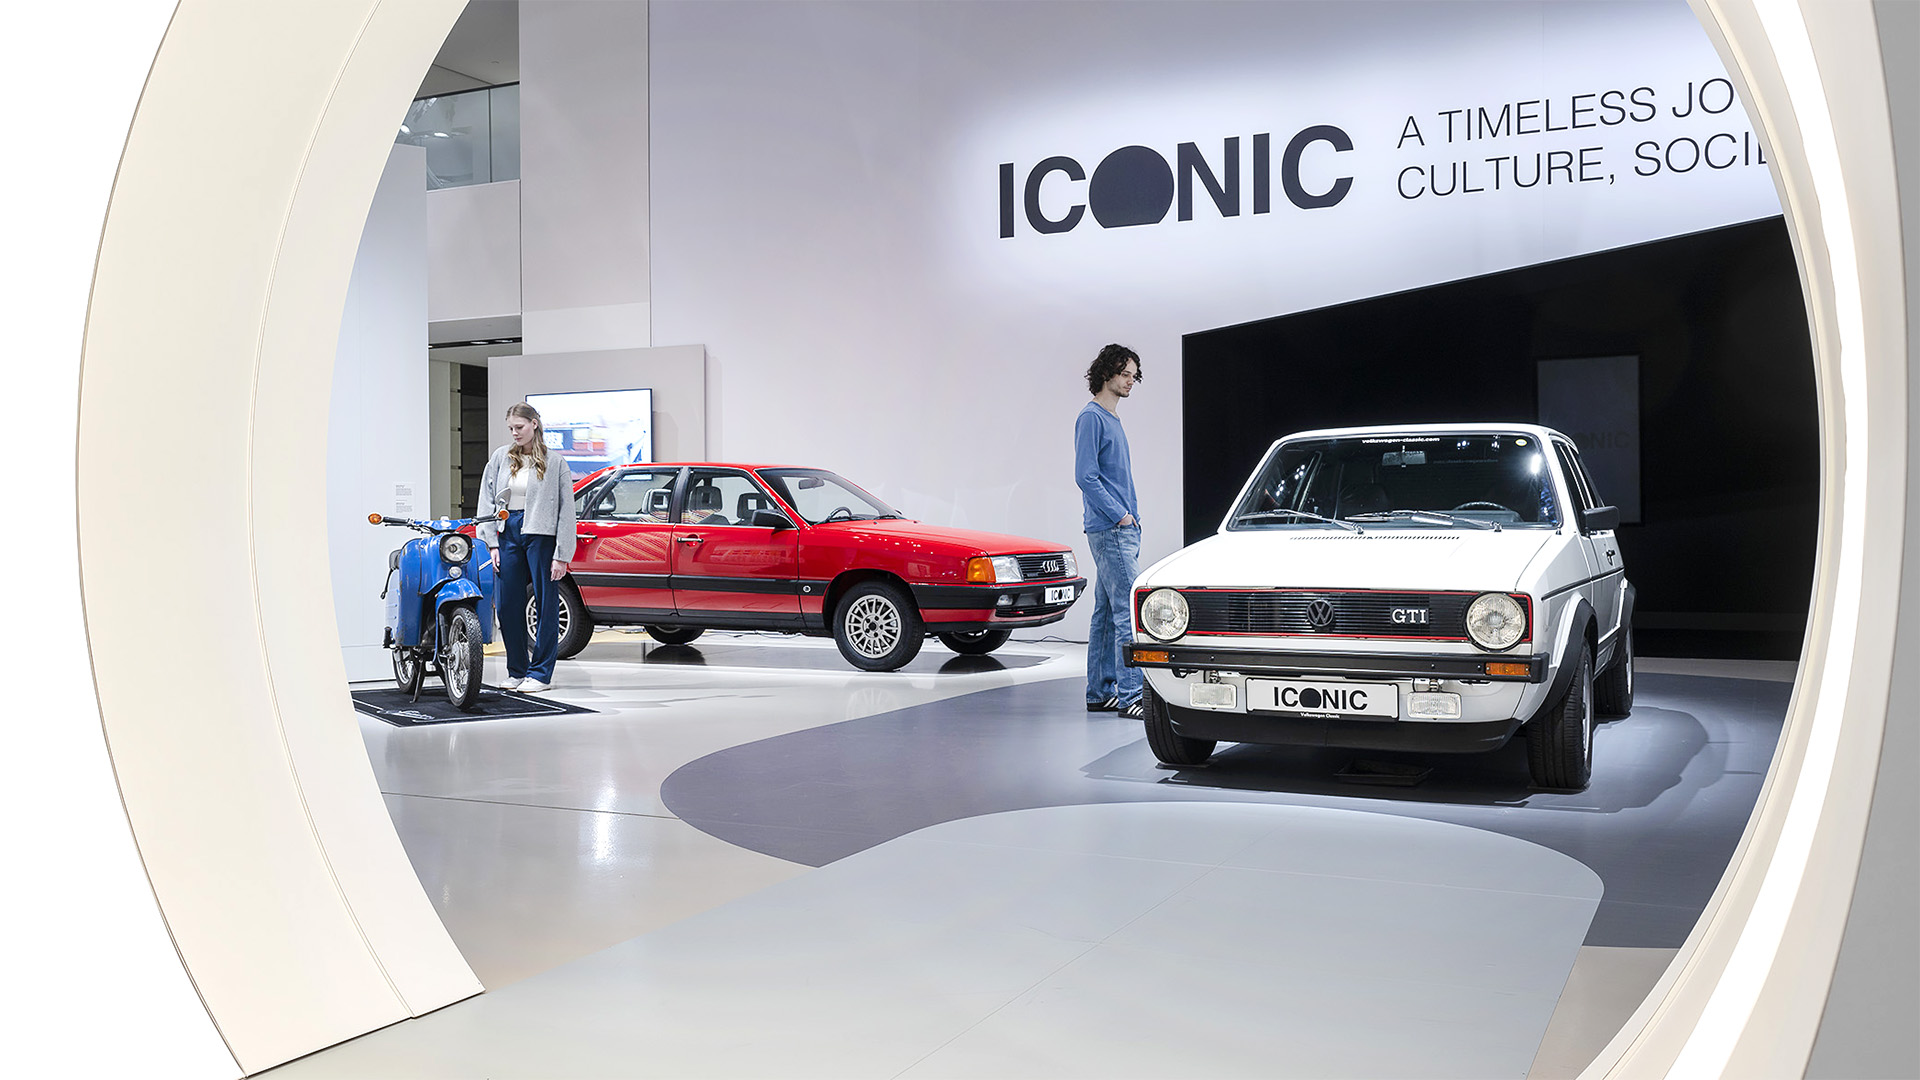 Iconic a timeless journey of culture, society and mobility